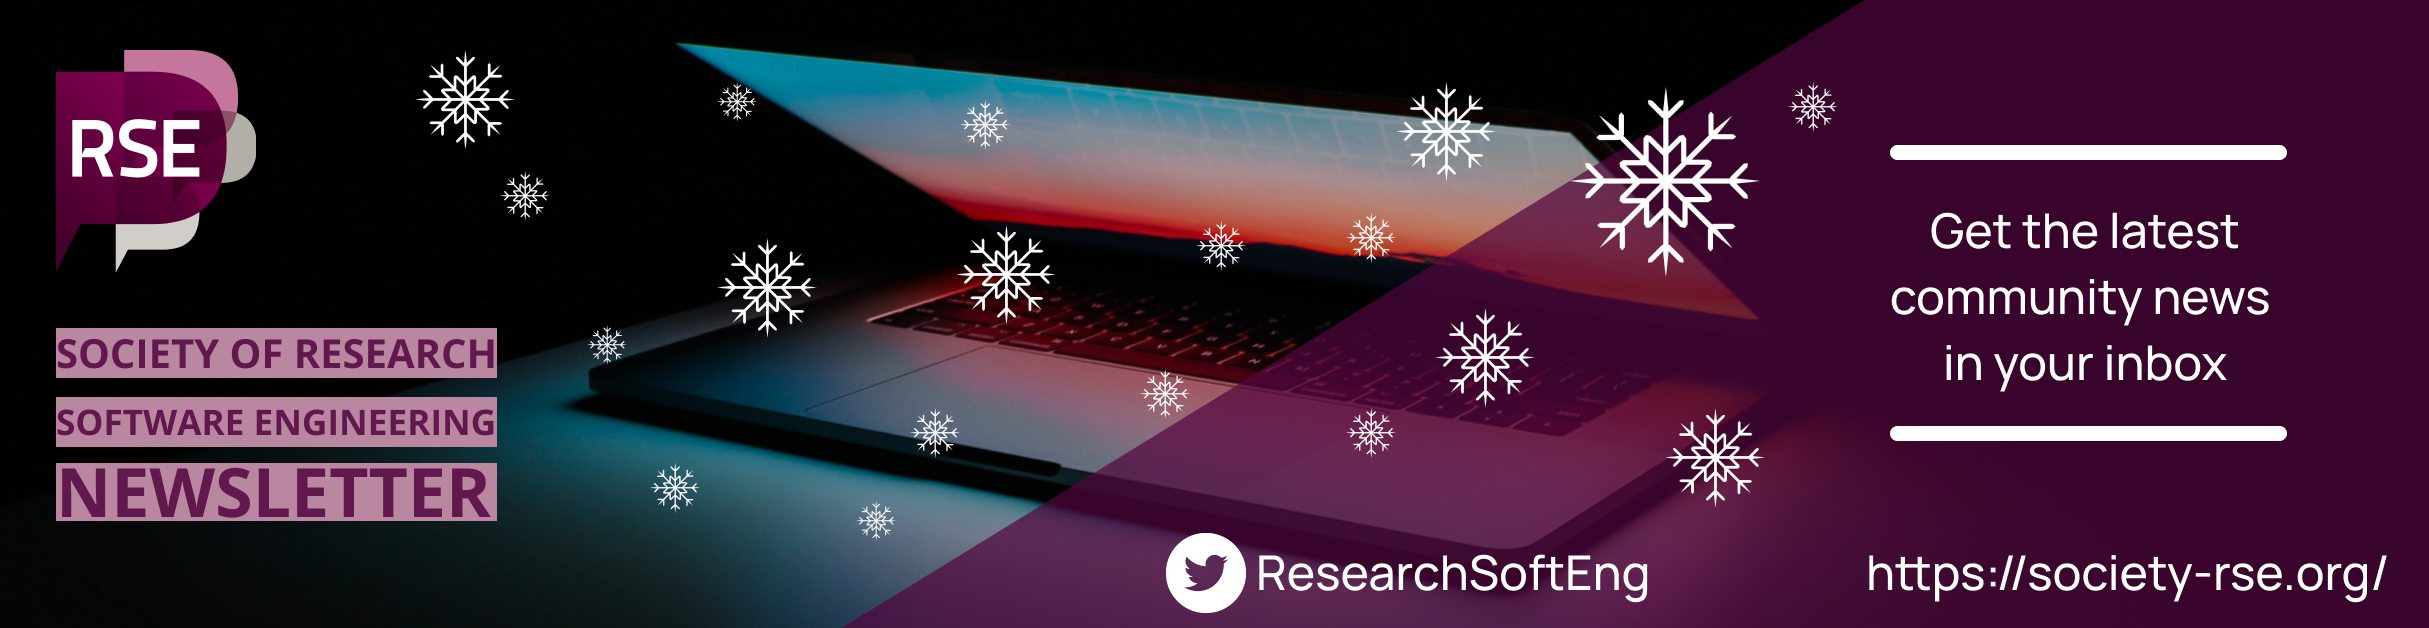 A laptop half open with surrounding text describing the Society of RSE newsletter with snowflakes